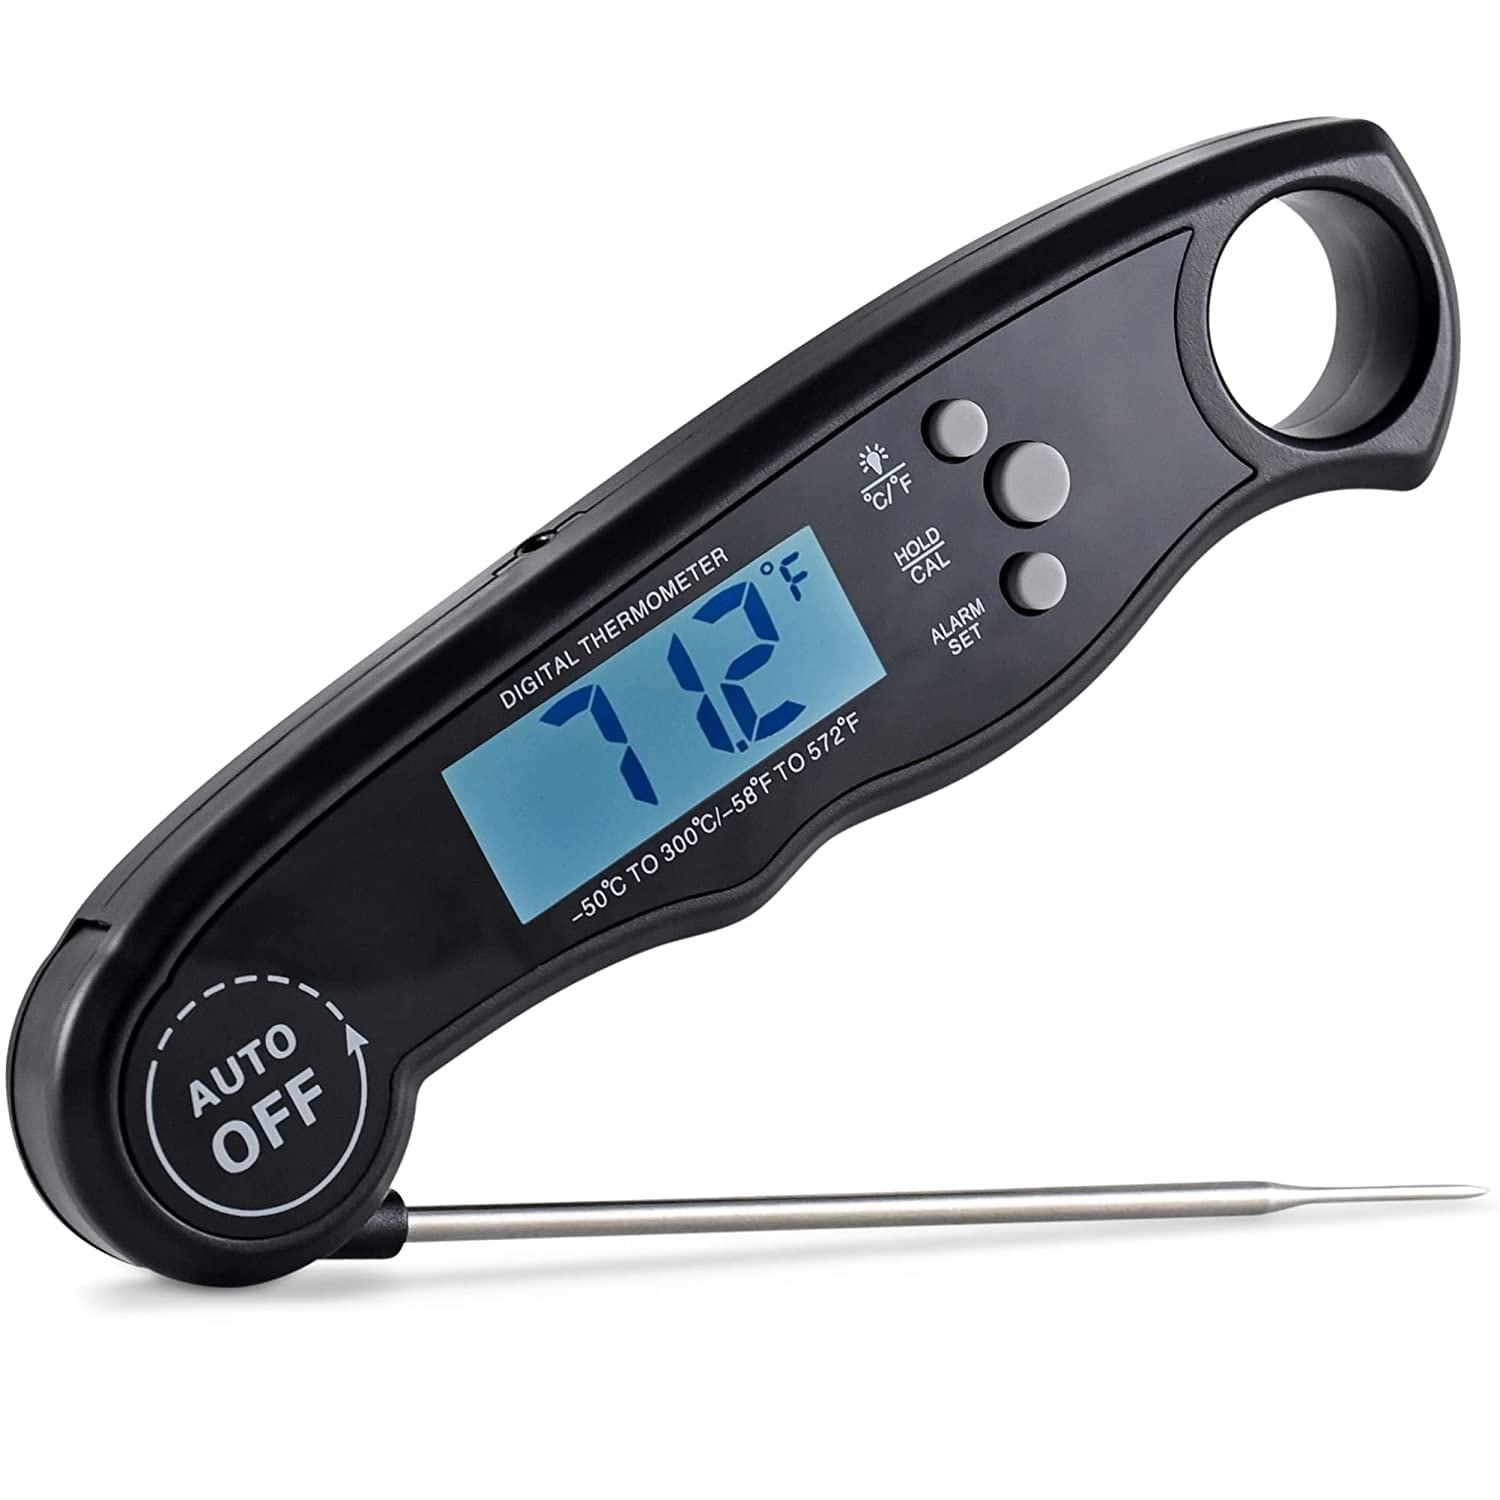 https://ak1.ostkcdn.com/images/products/is/images/direct/de4b5f288ece4155eaeffa4c9ba08f66f1e966b3/Cheer-Collection-Digital-Meat-Thermometer.jpg